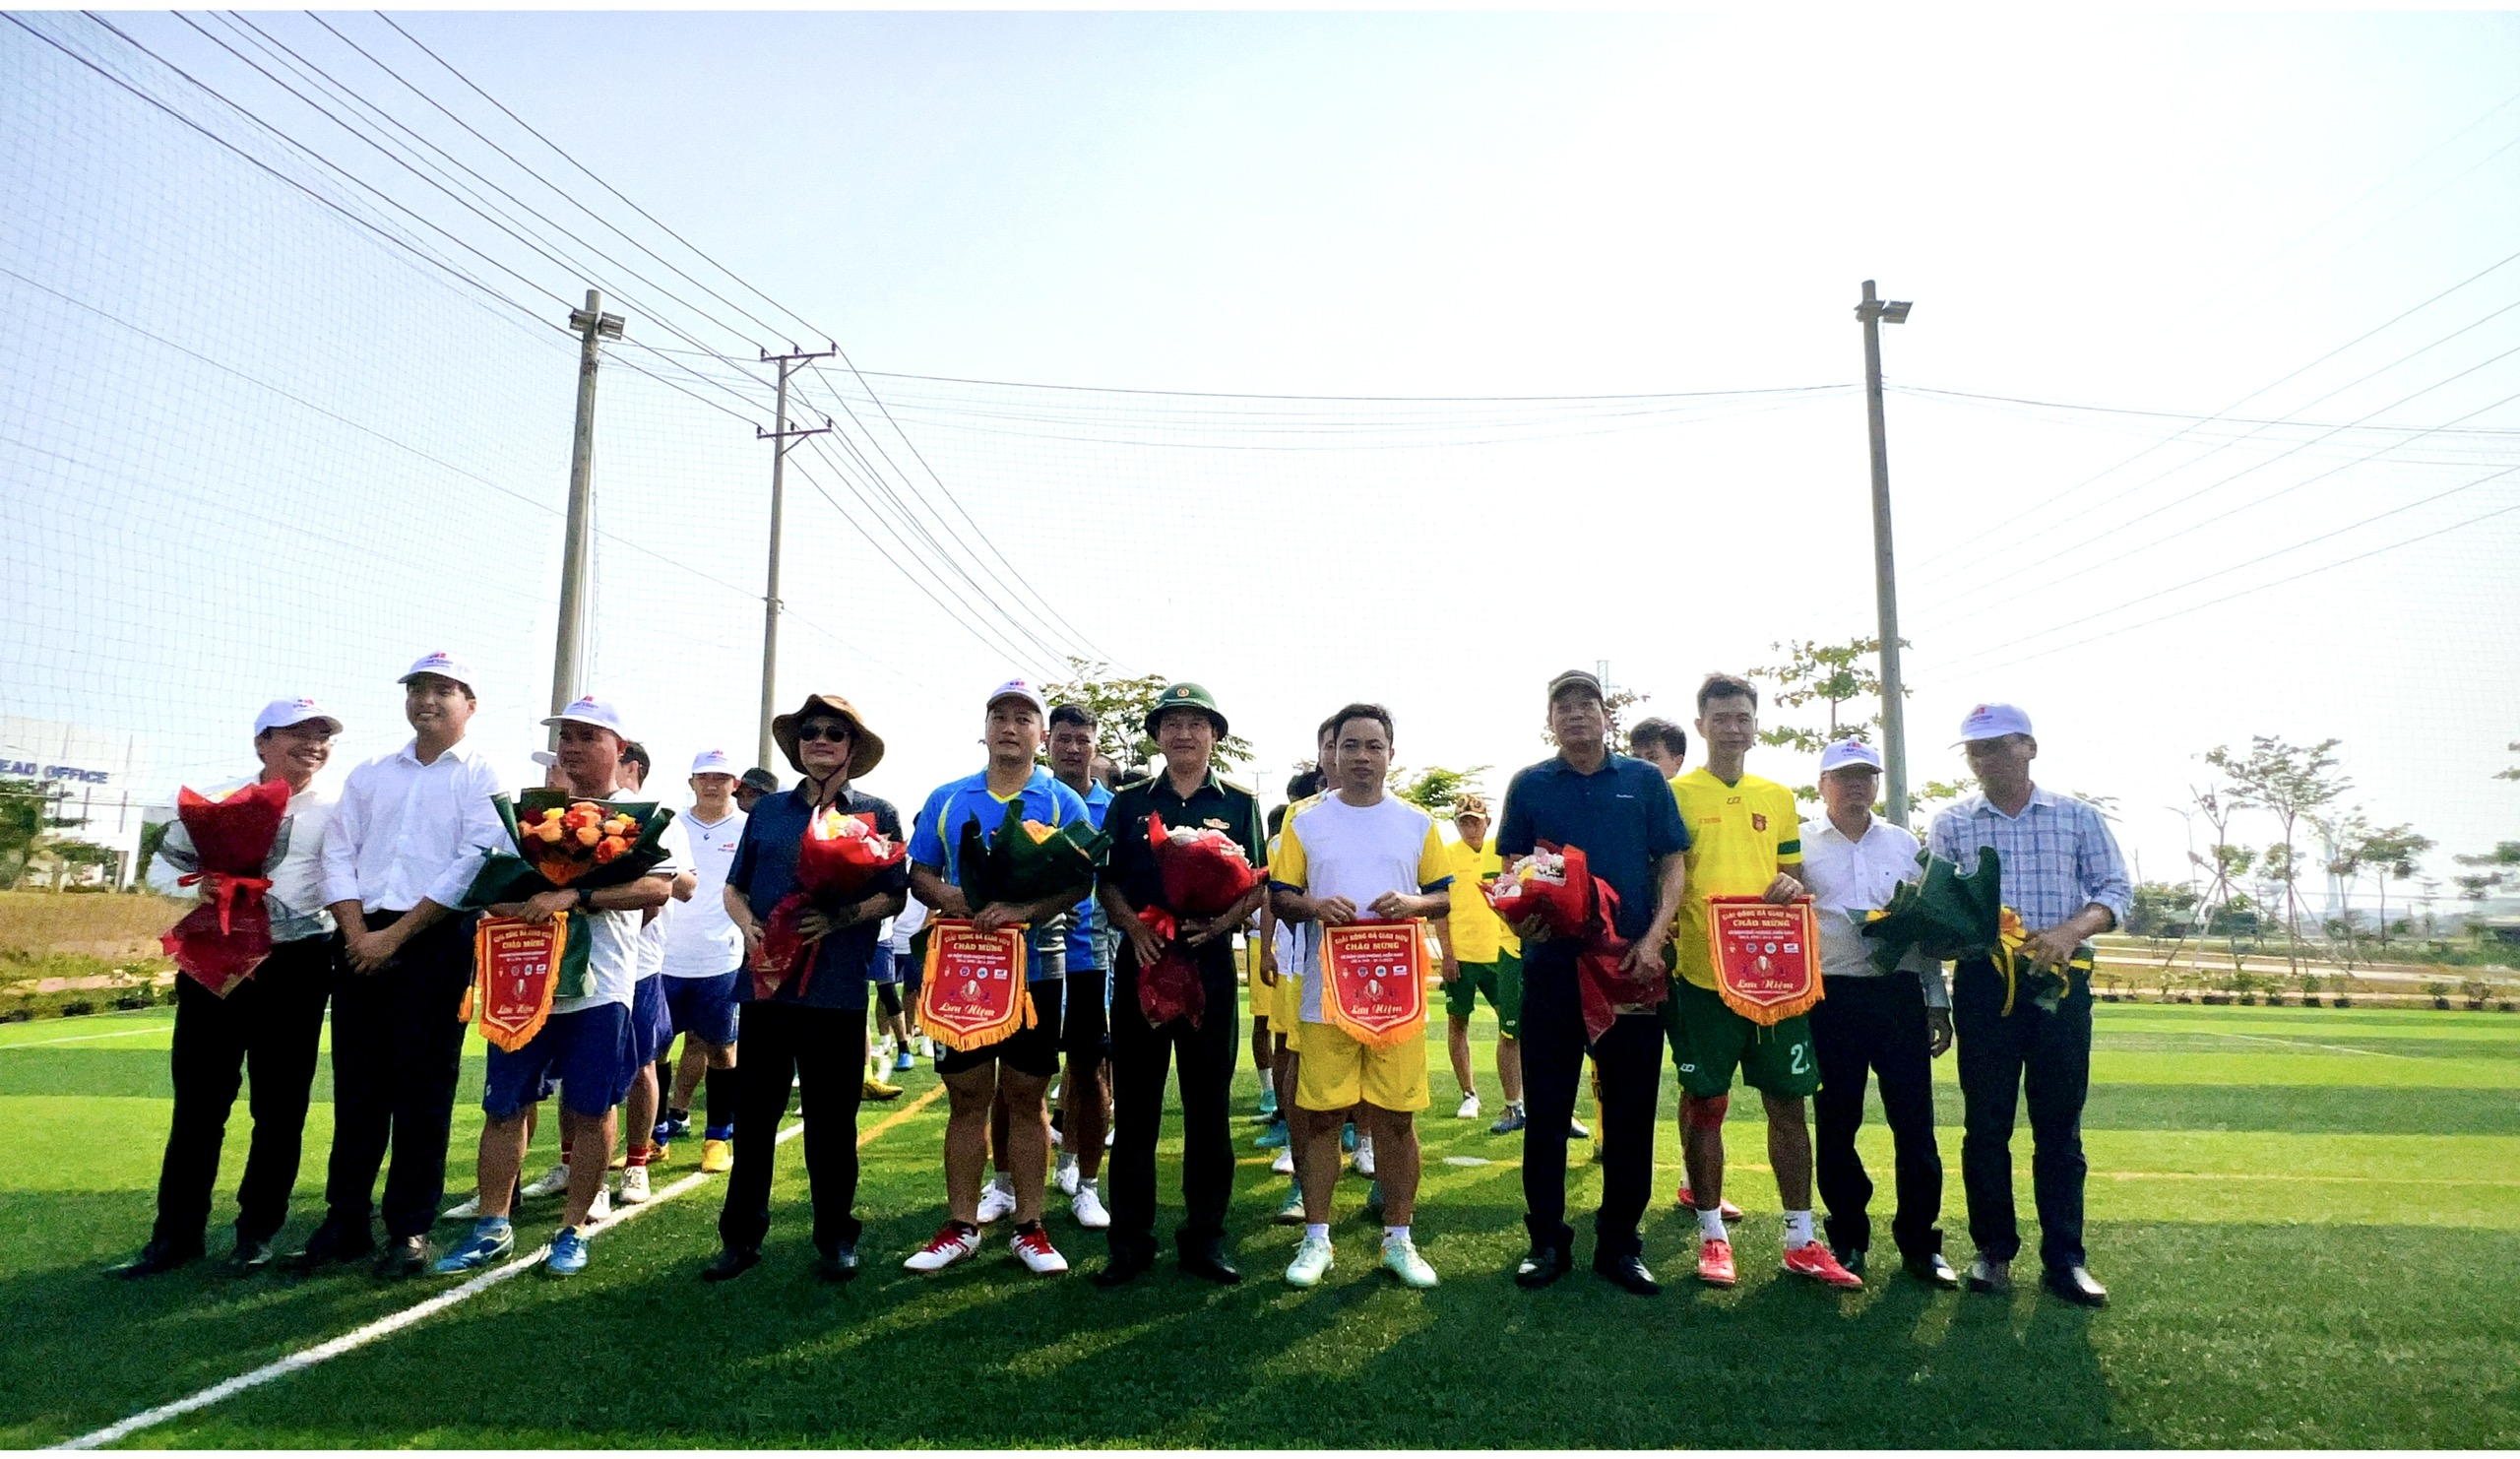 FRIENDLY SOCCER MATCH TO CELEBRATE 48 YEARS OF THE SOUTH LIBERATION DAY